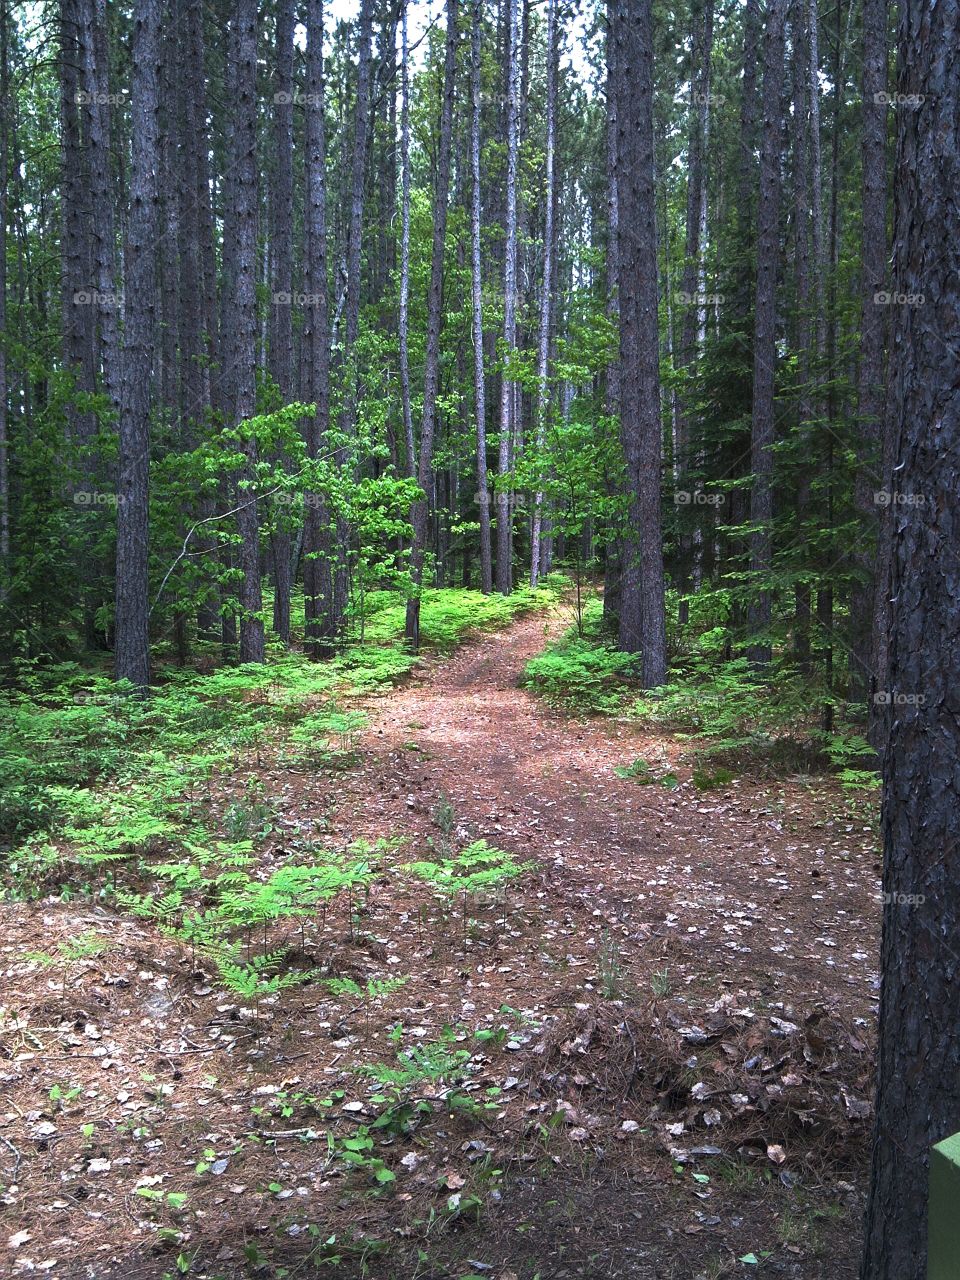 Trail through Jack Pines. Taken near the Huron National Forest Michigan 2013 